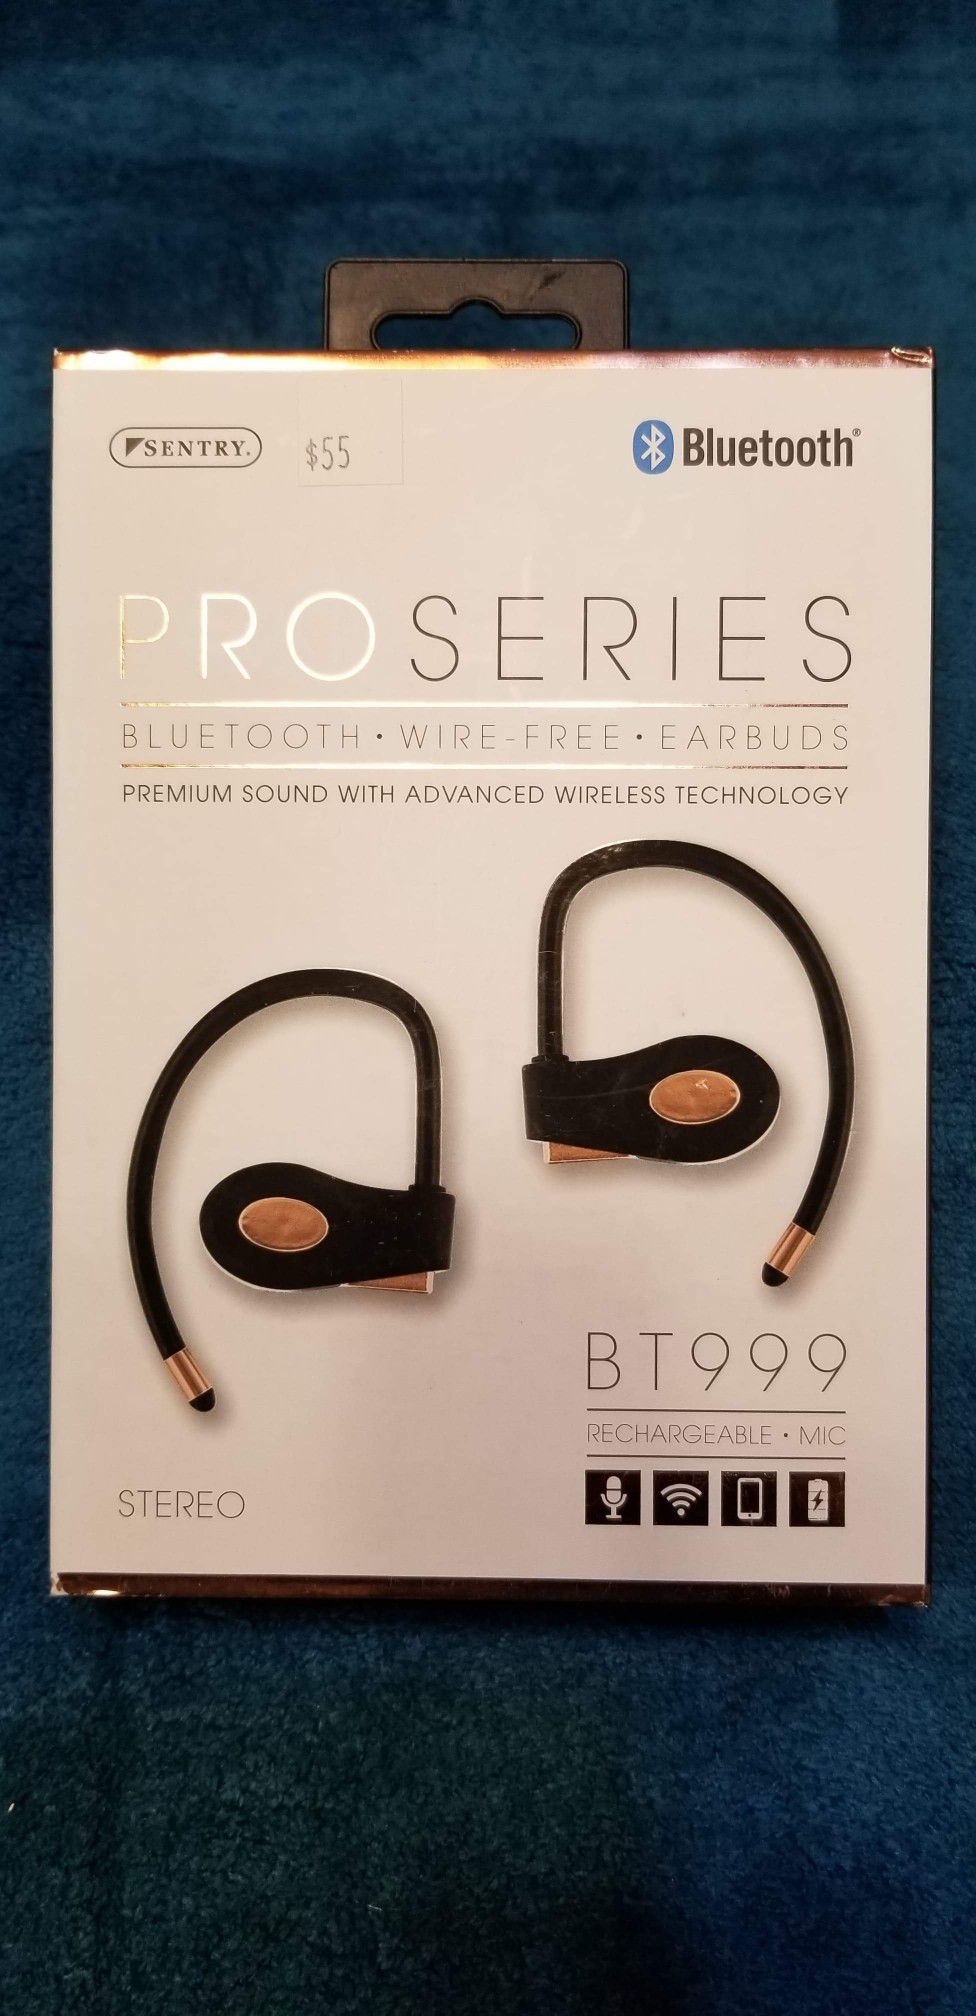 Earpiece Earphones  earbuds headphone Bluetooth wireless  hear music and answer calls use with any phone or Bluetooth device